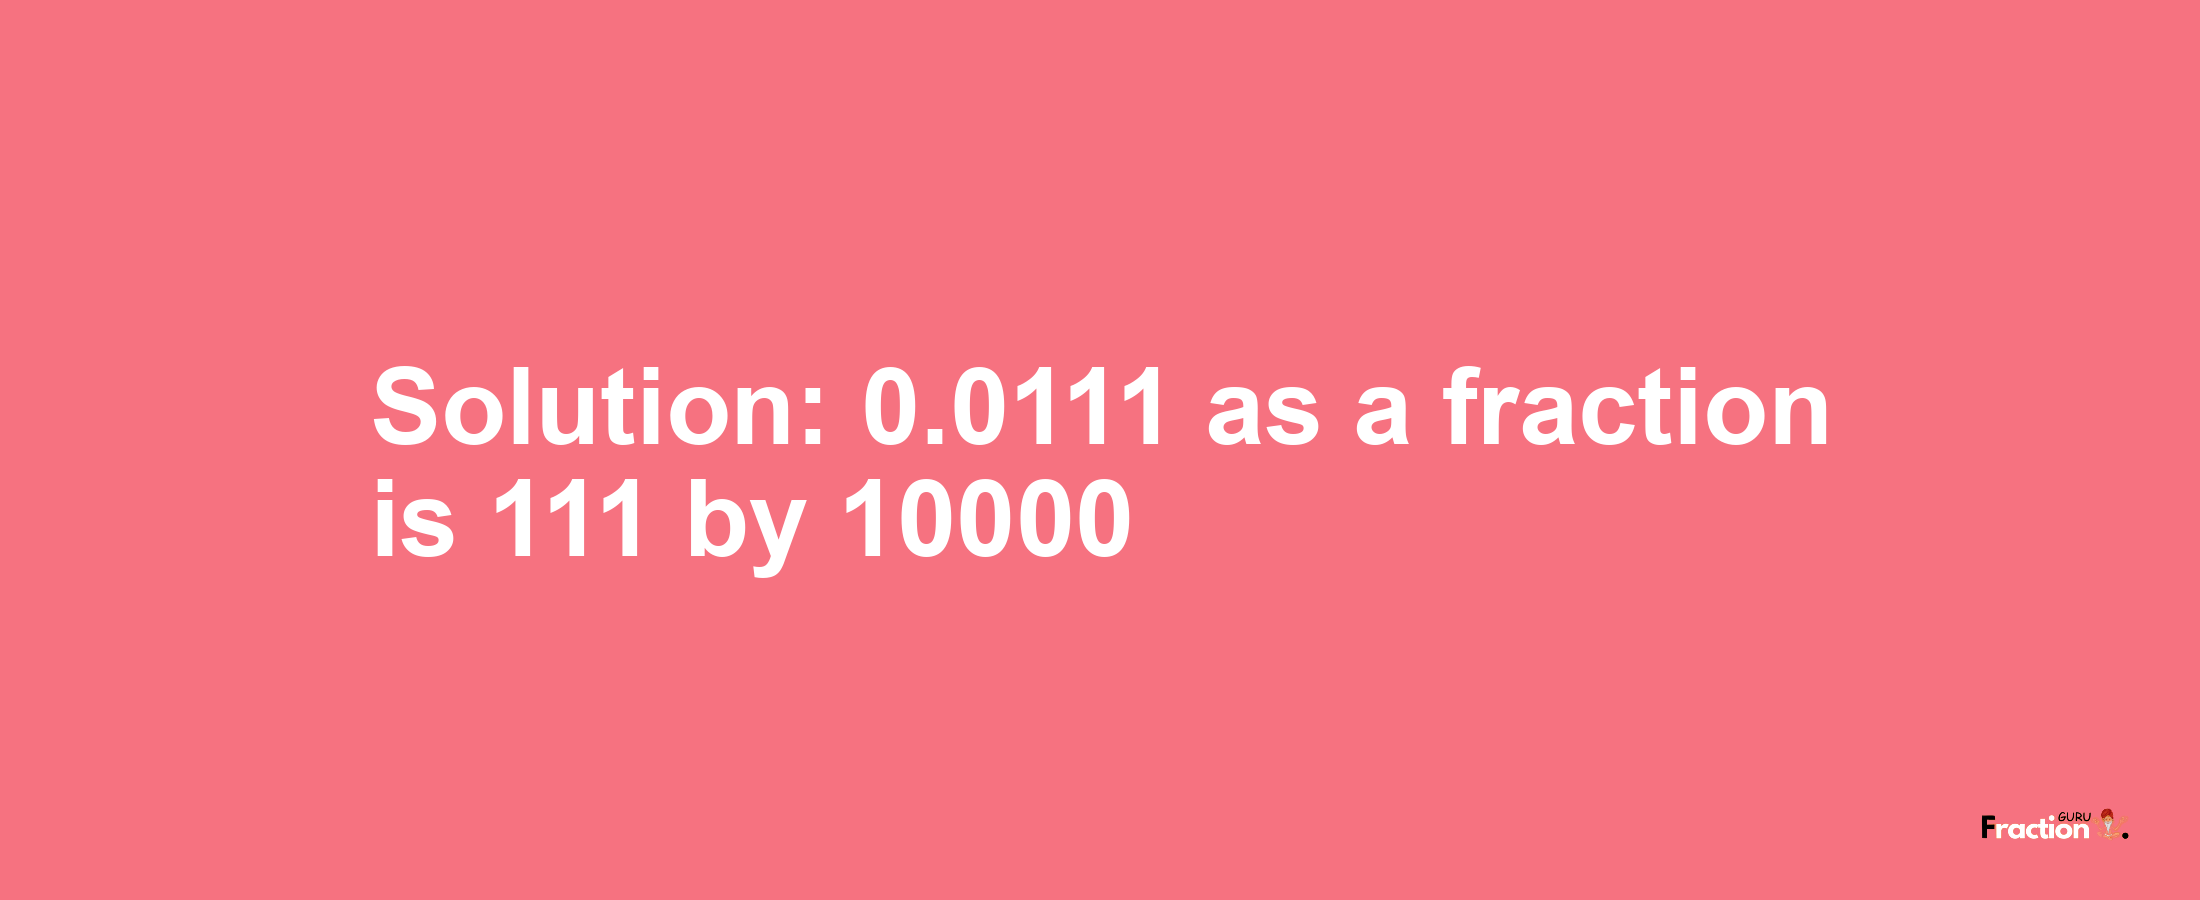 Solution:0.0111 as a fraction is 111/10000